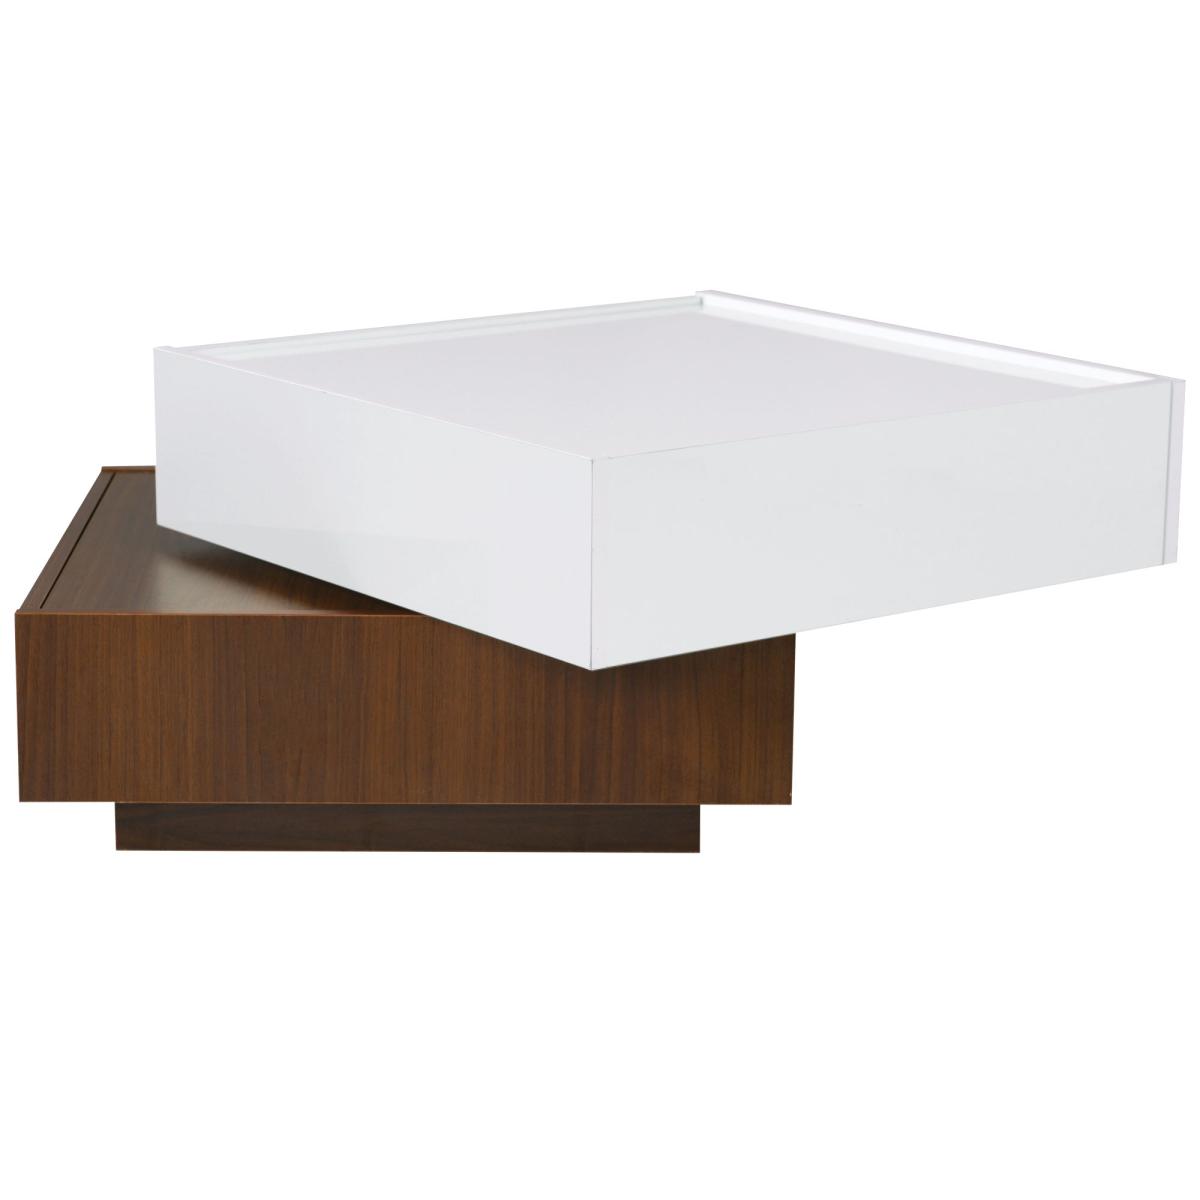 ON-TREND Multi-functional Square 360°Rotating Coffee Table with 2 Drawers, High Gloss 2-Tier Center Table with Swivel Tabletop and Storage, Walnut Table Frame Side Table for Living Room, White